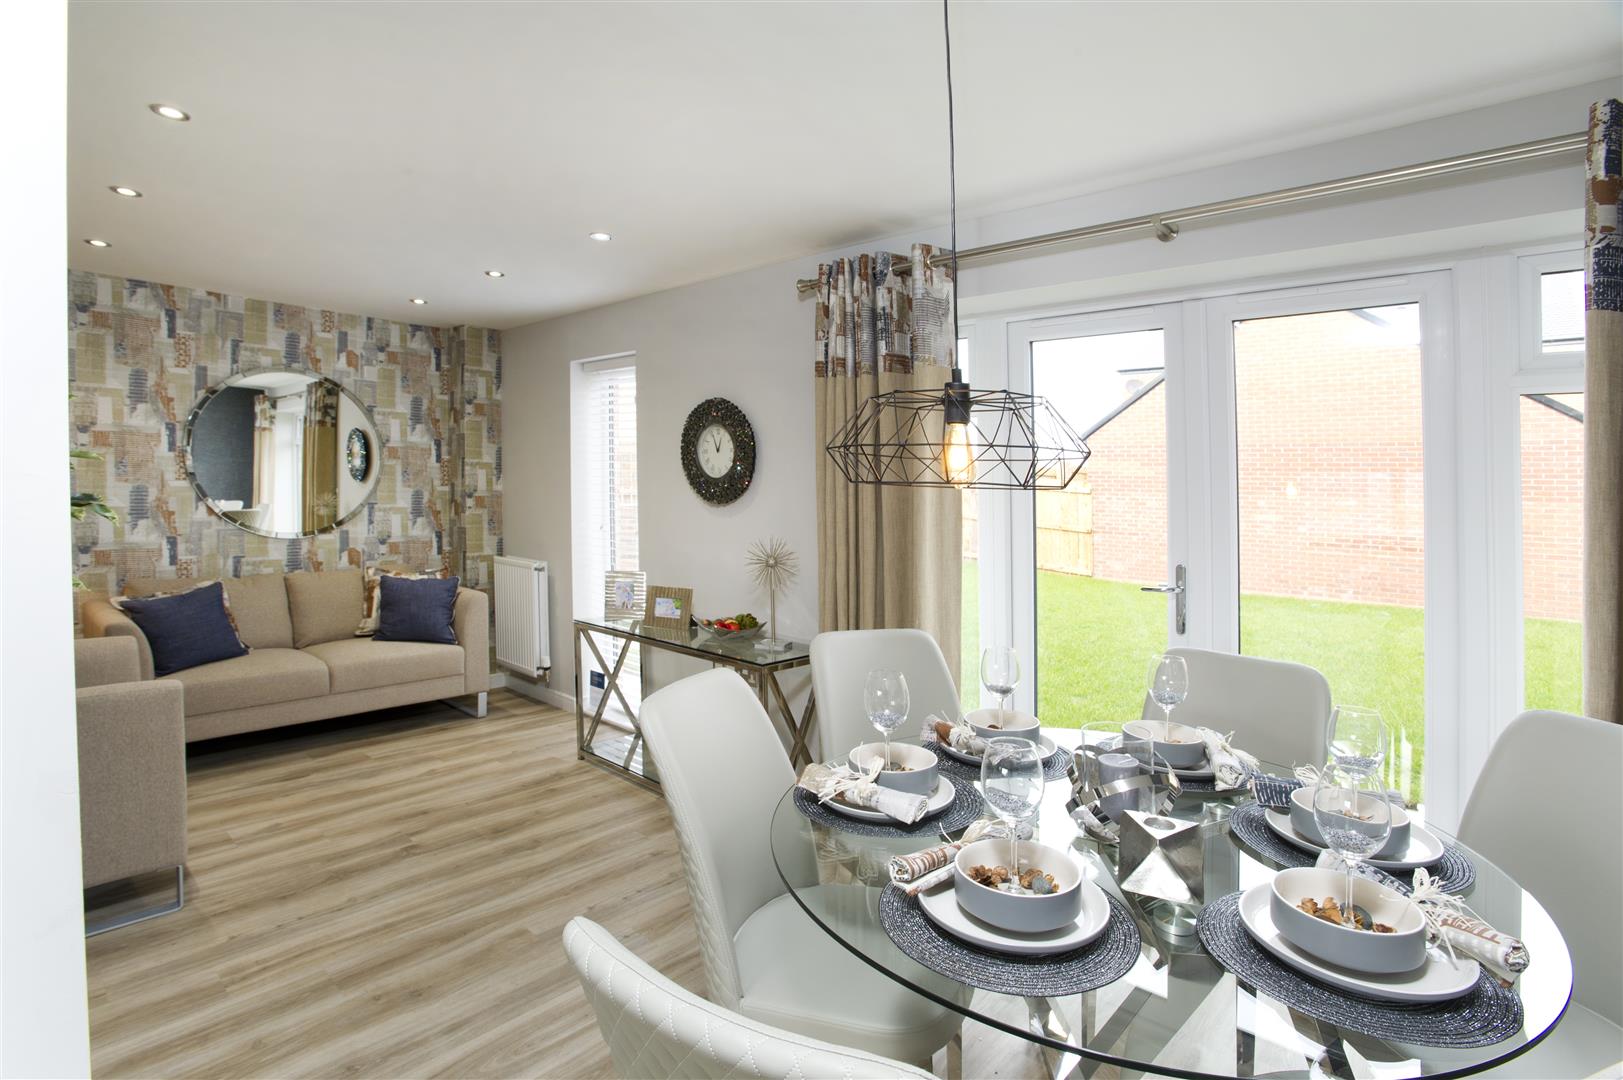 4 bed detached house for sale in White House Drive, Newcastle upon Tyne  - Property Image 1